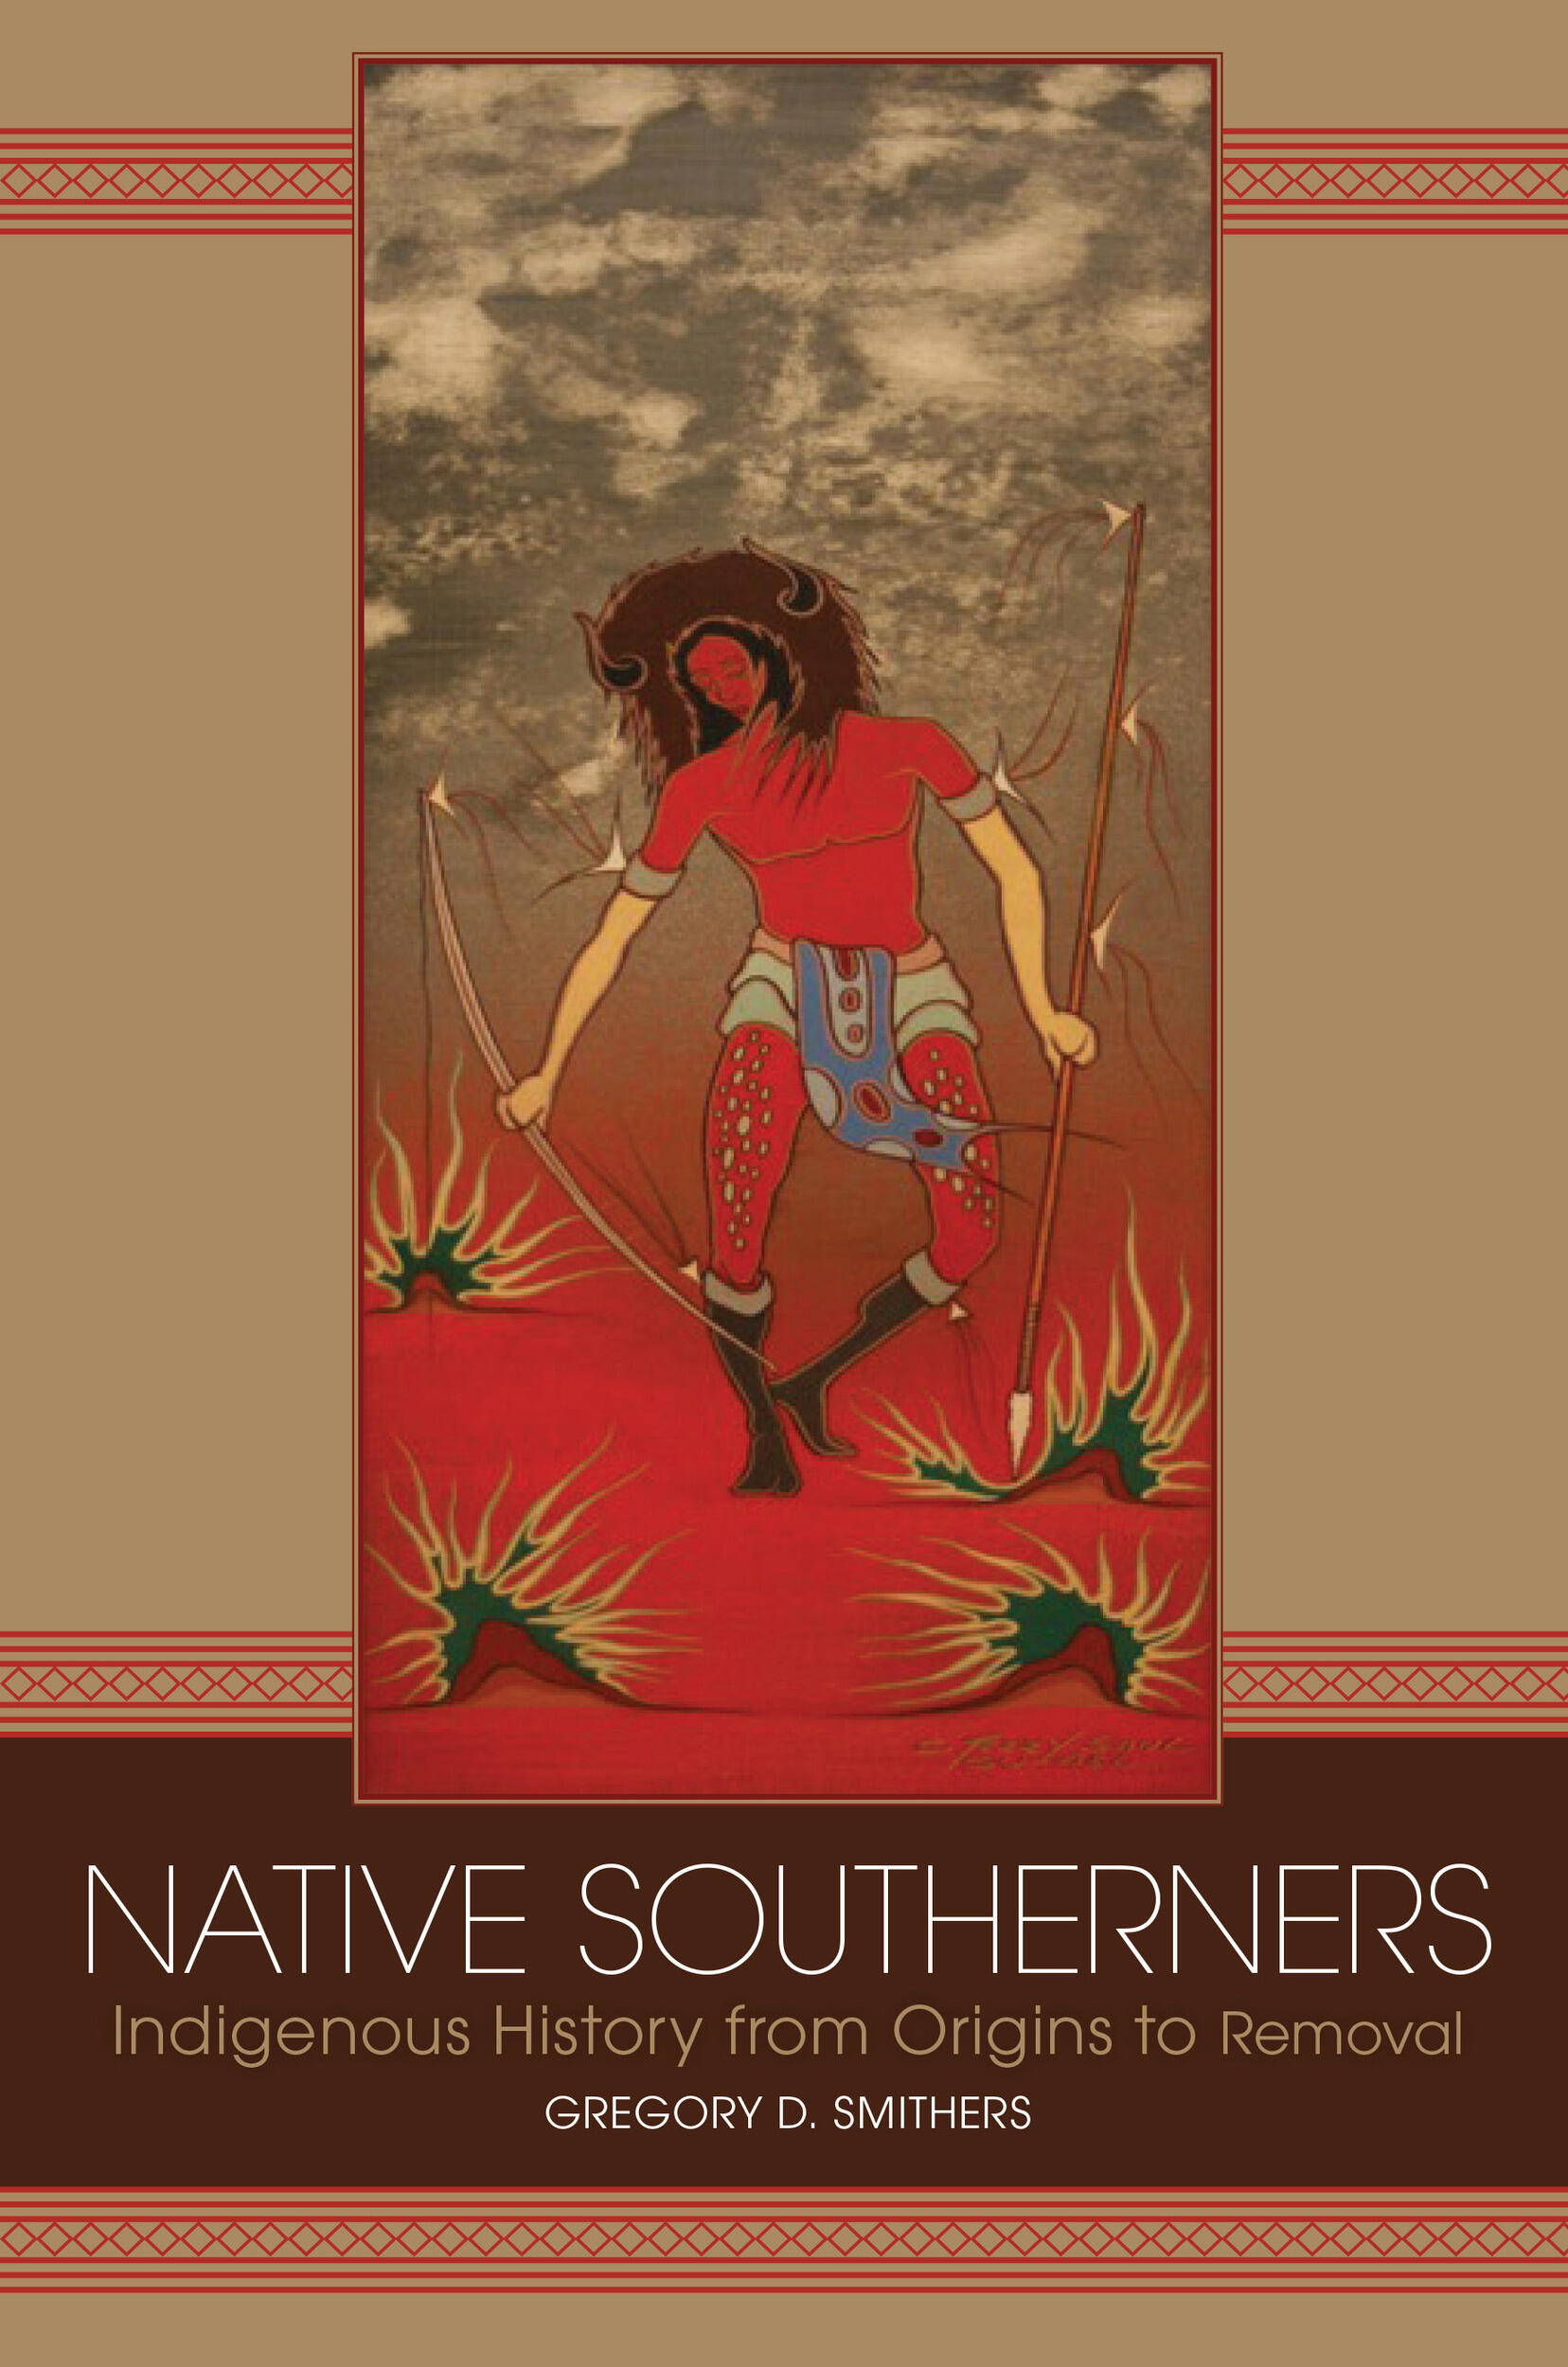 The cover of Gregory Smithers' 2019 book, "Native Southerners: Indigenous History from Origins to Removal.”